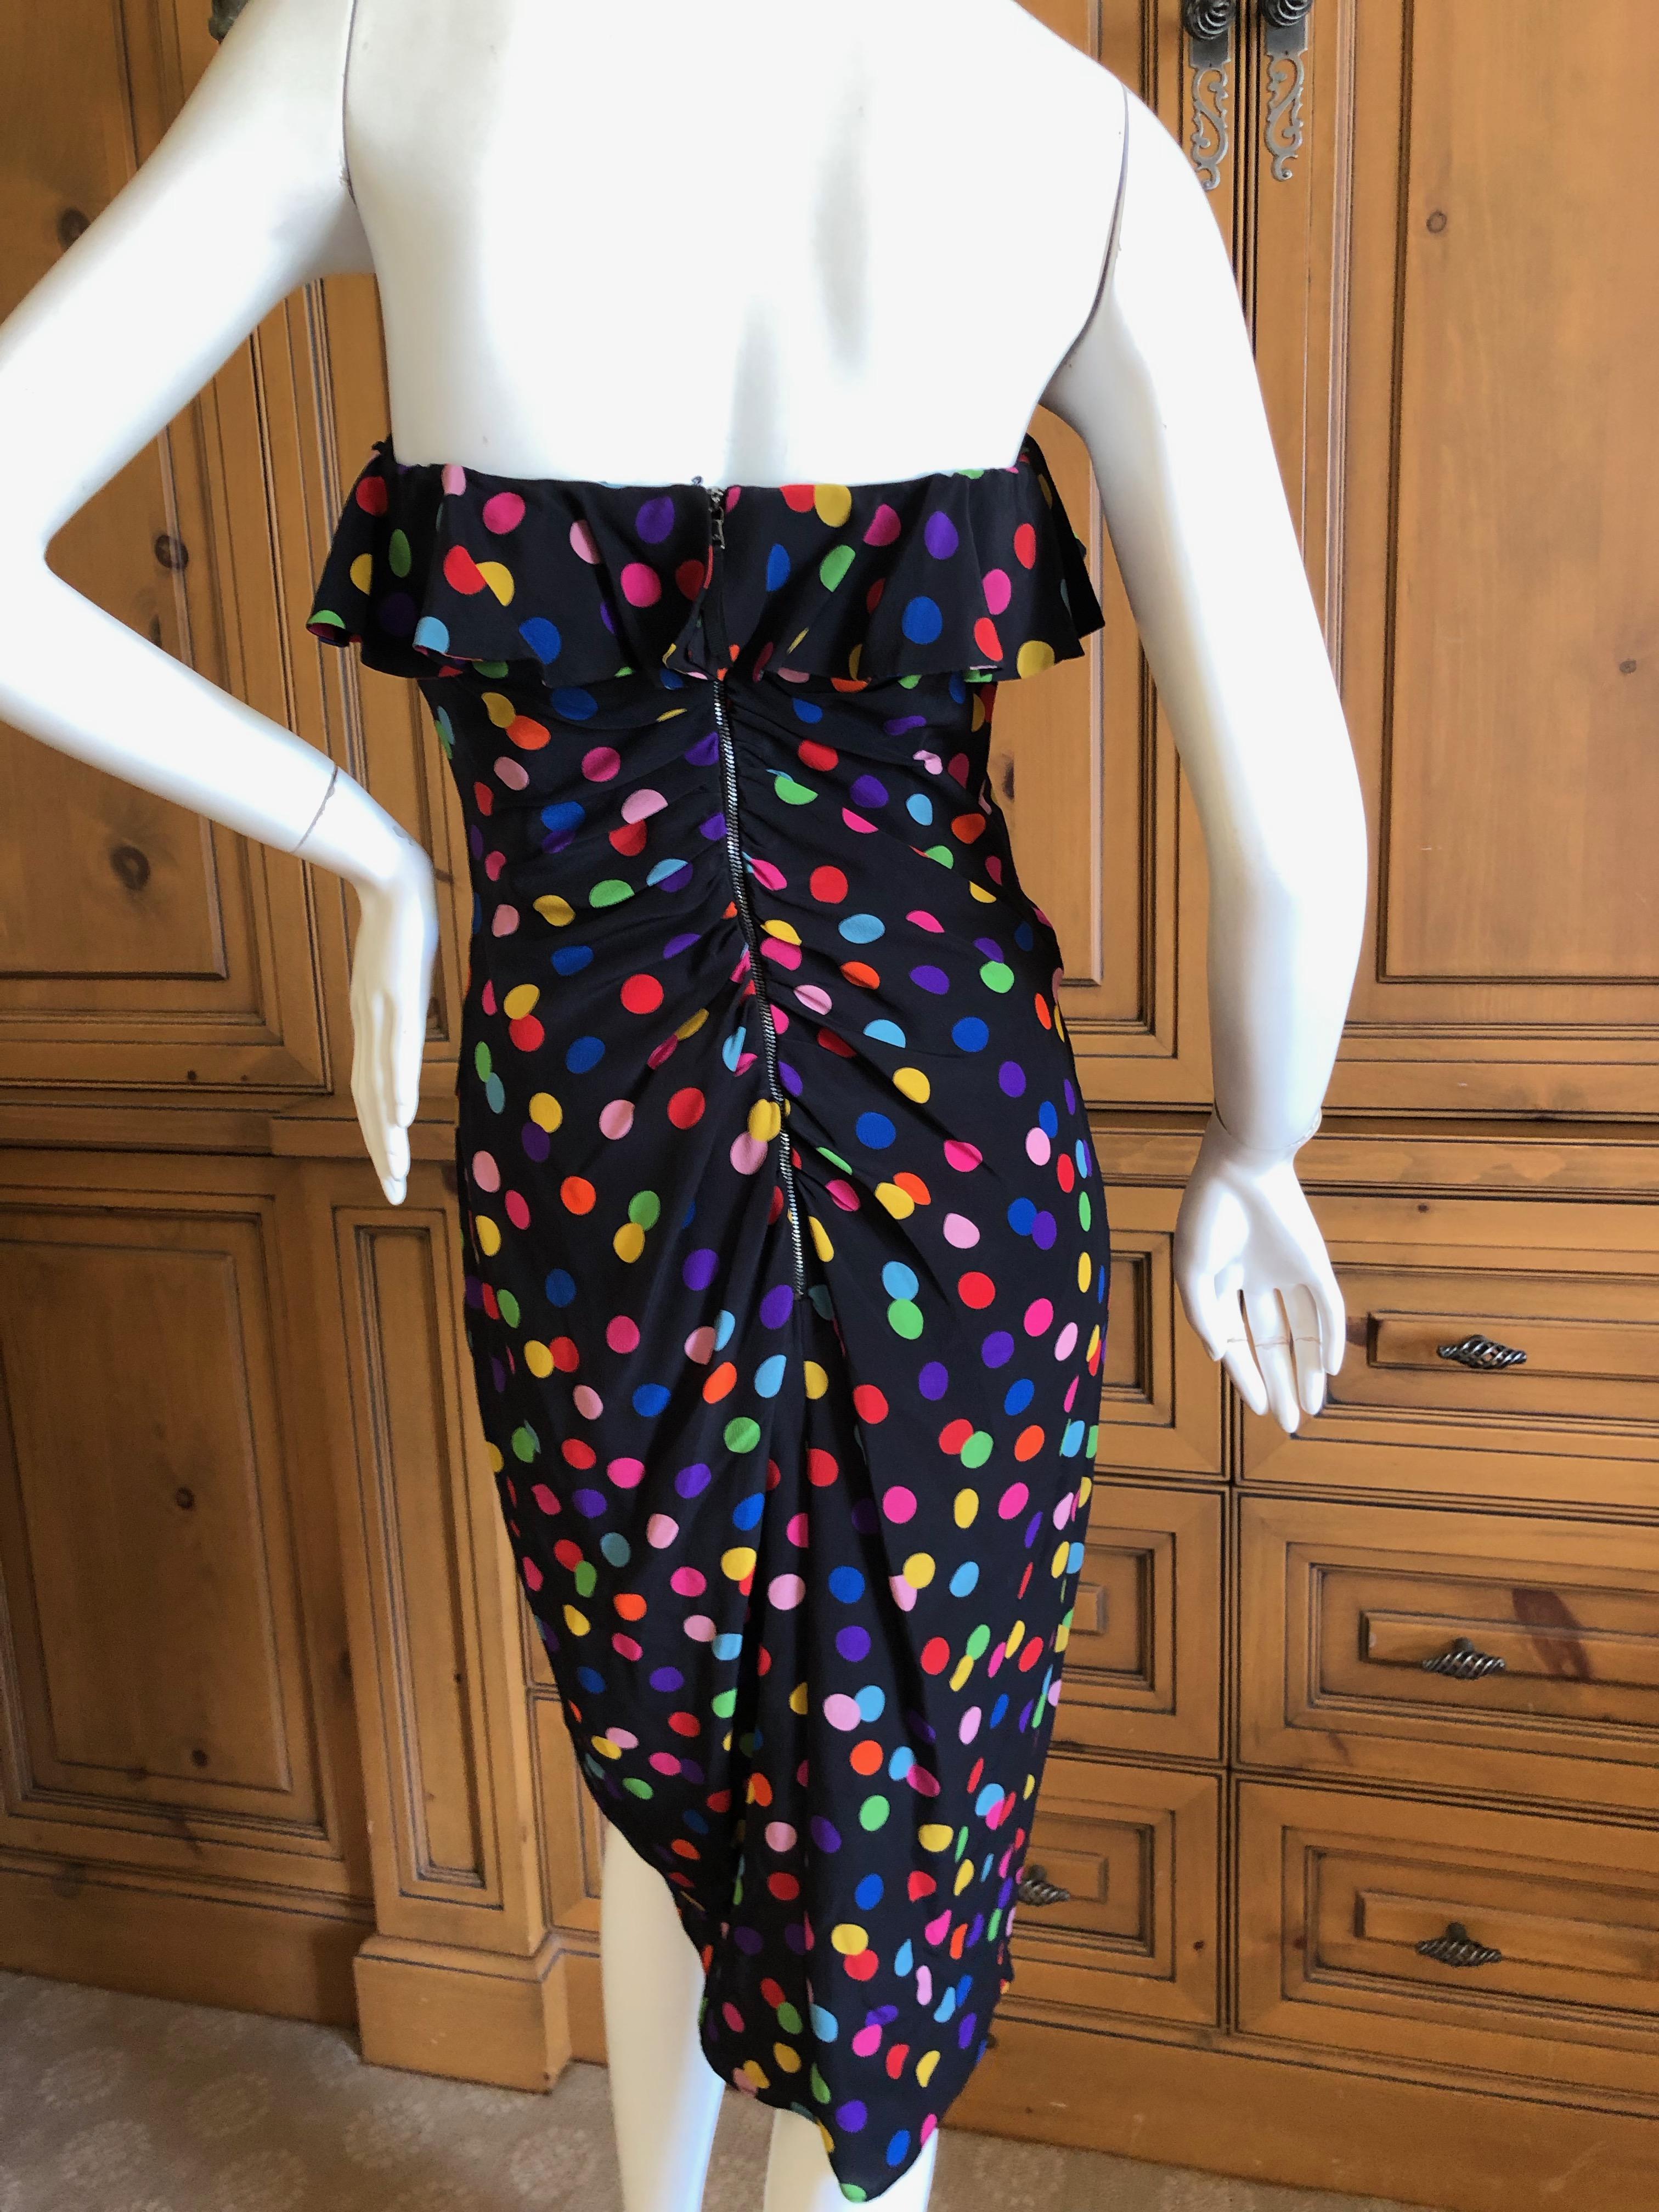 Dolce & Gabbana for D&G Vintage Polka Dot Silk Cocktail Dress with Inner Corset In Excellent Condition For Sale In Cloverdale, CA